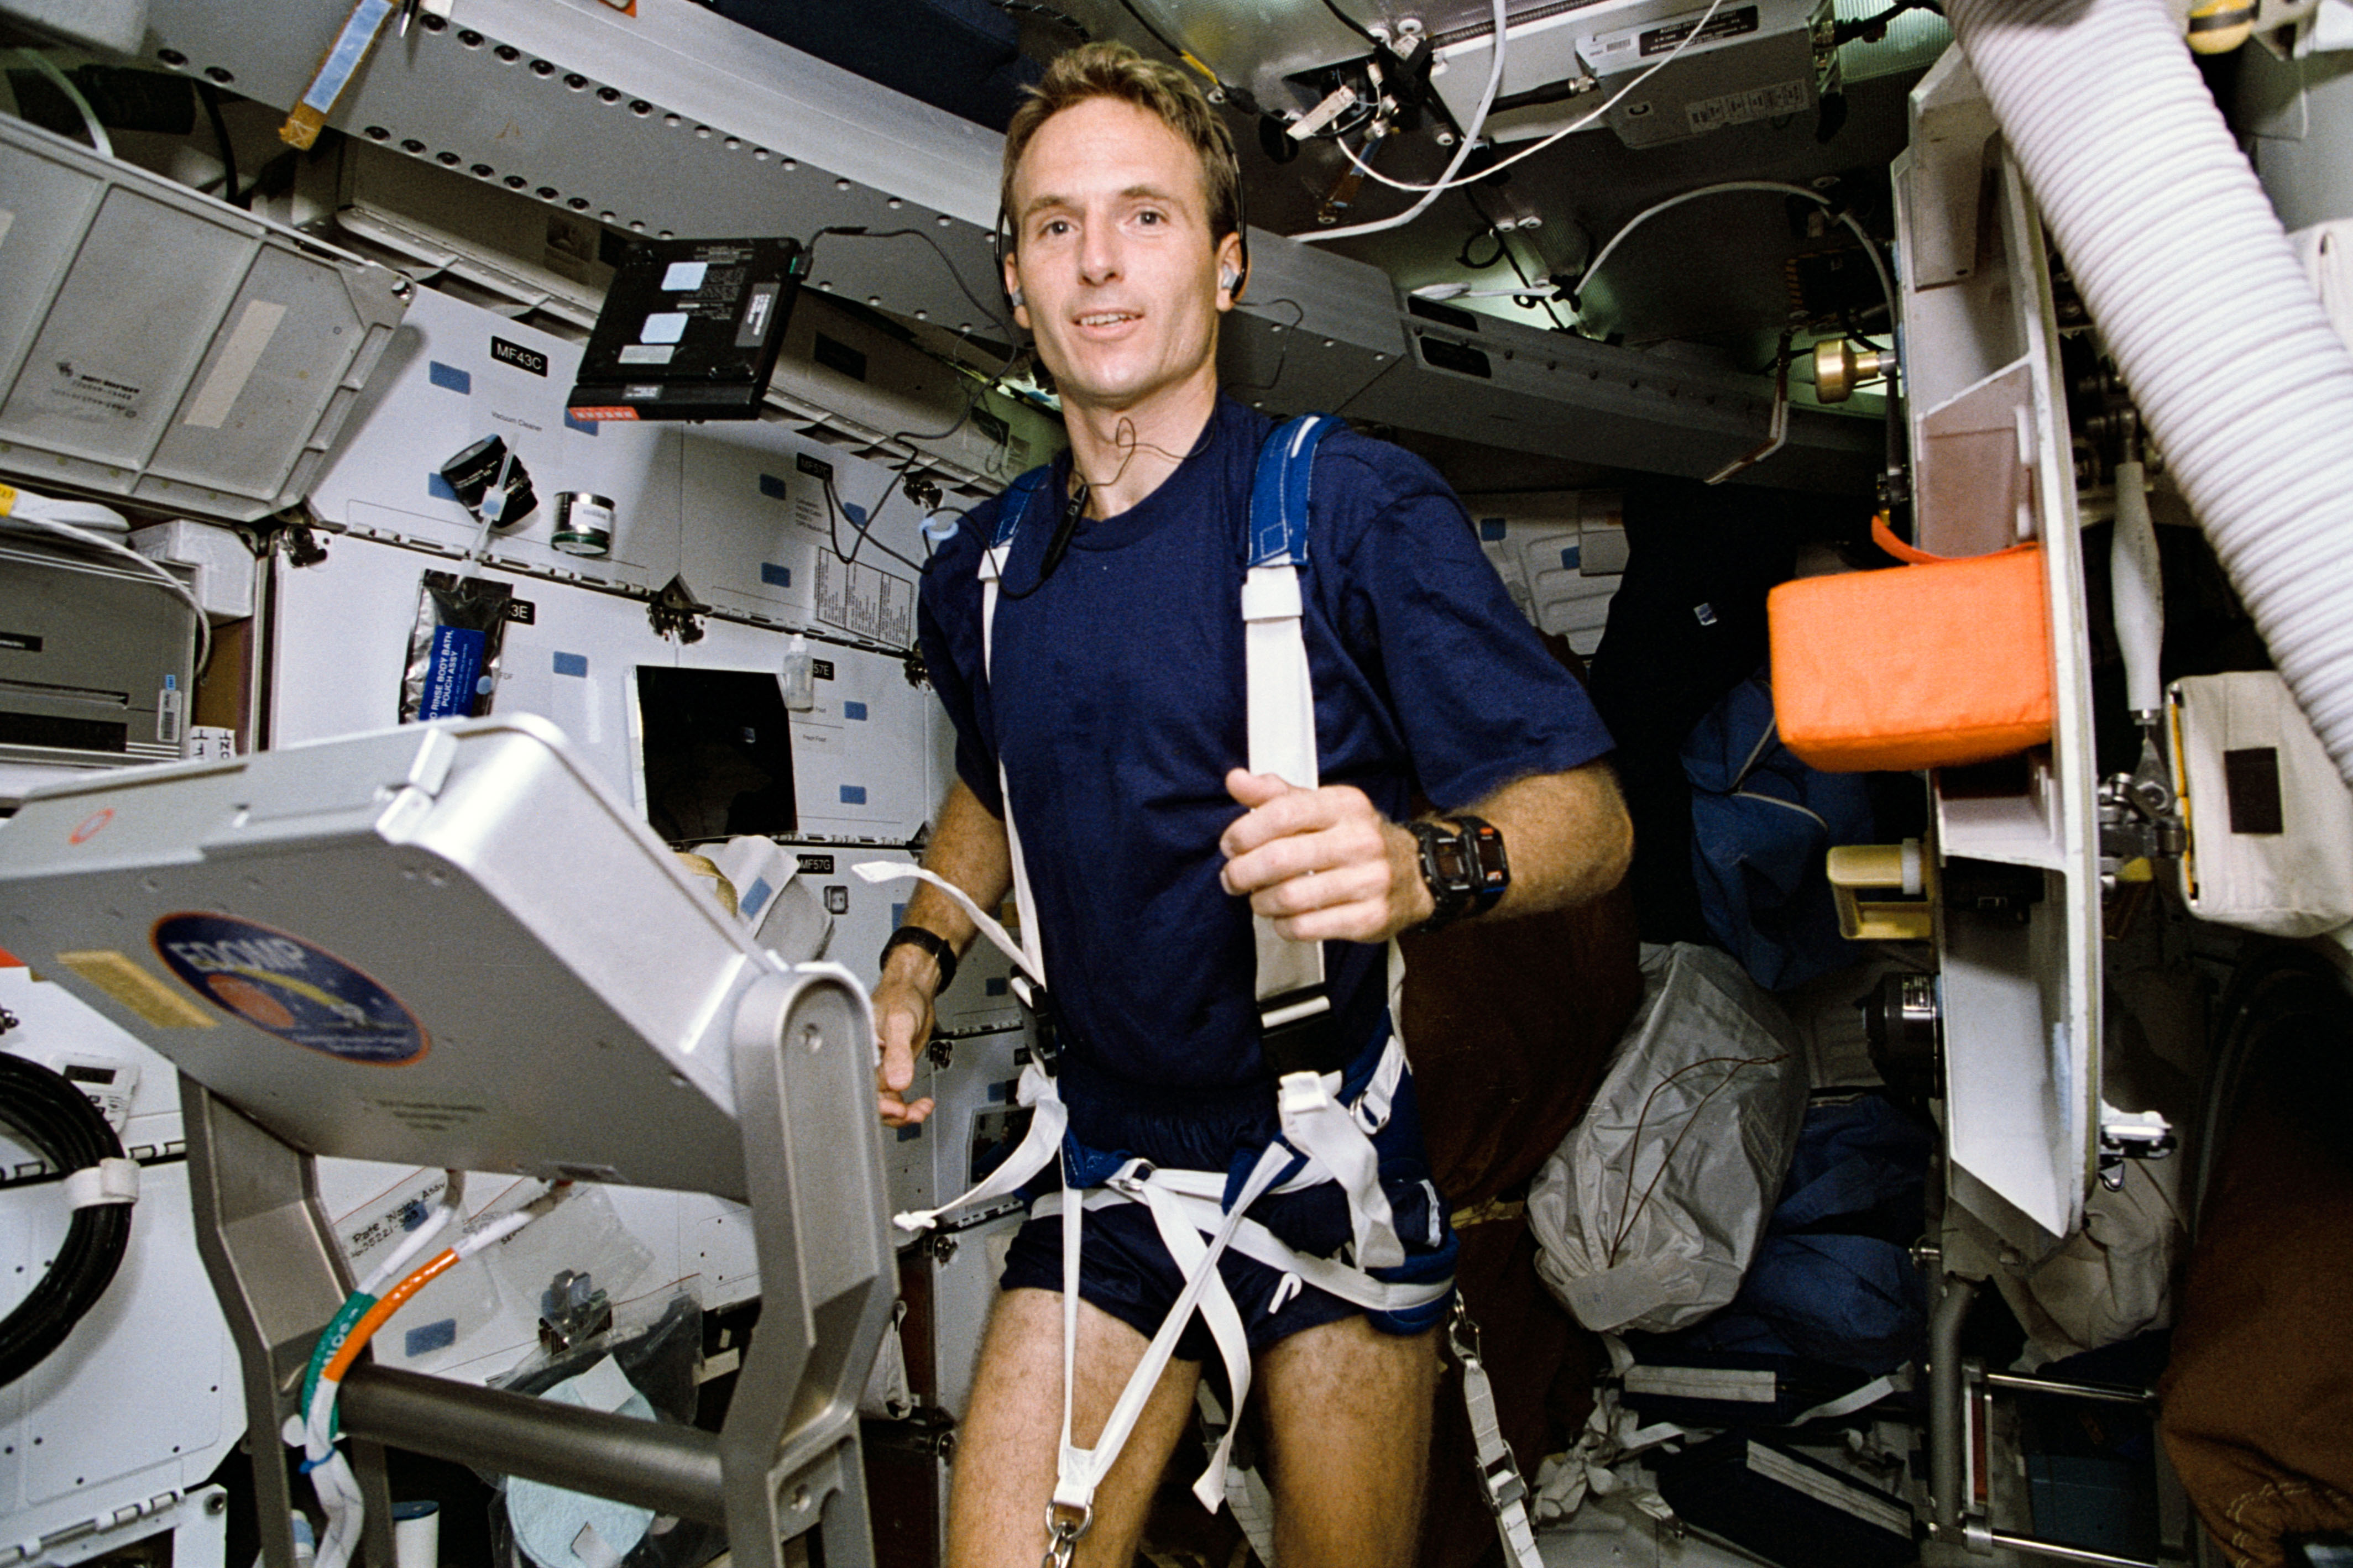 Pictured during his STS-64 mission in September 1994, Jerry Linenger's later career saw him become the first U.S. astronaut to perform a spacewalk on a non-U.S. spacecraft, wearing a non-U.S. space suit. Photo Credit: NASA